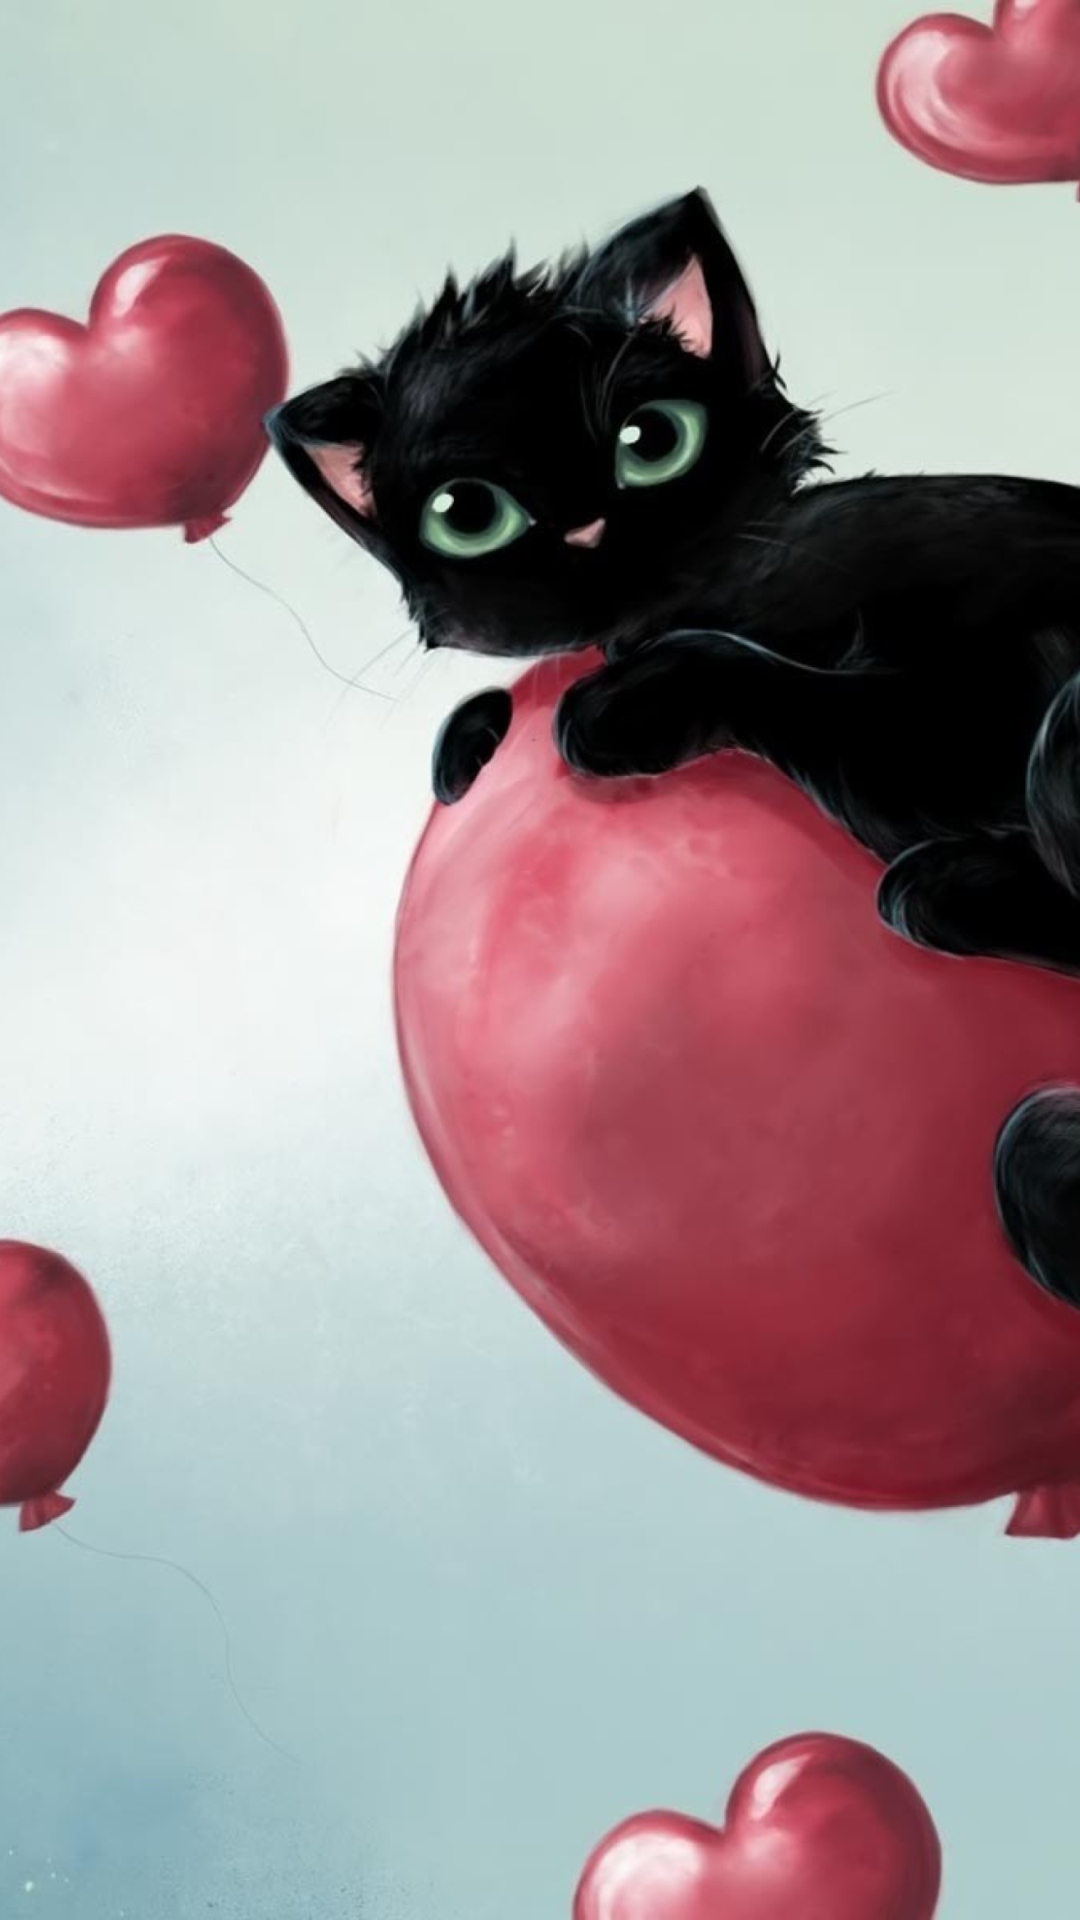 Black Kitty And Red Heart Balloons wallpaper 1080x1920